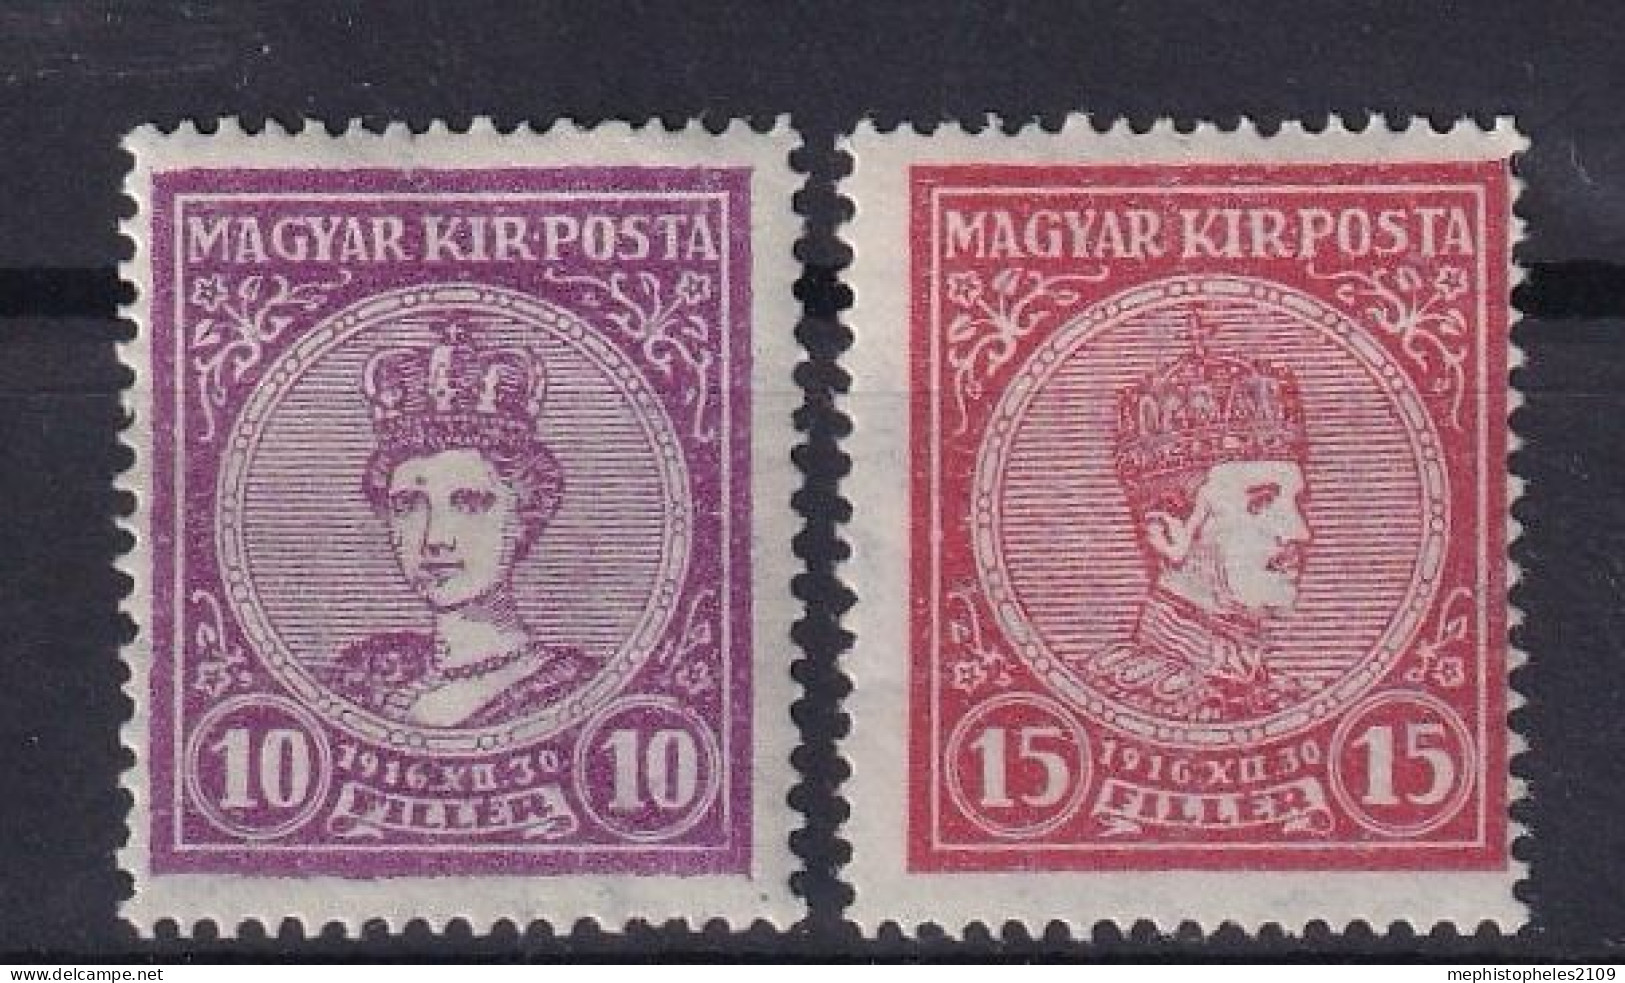 HUNGARY 1916 - MNH - Sc# 104, 105 - Unused Stamps